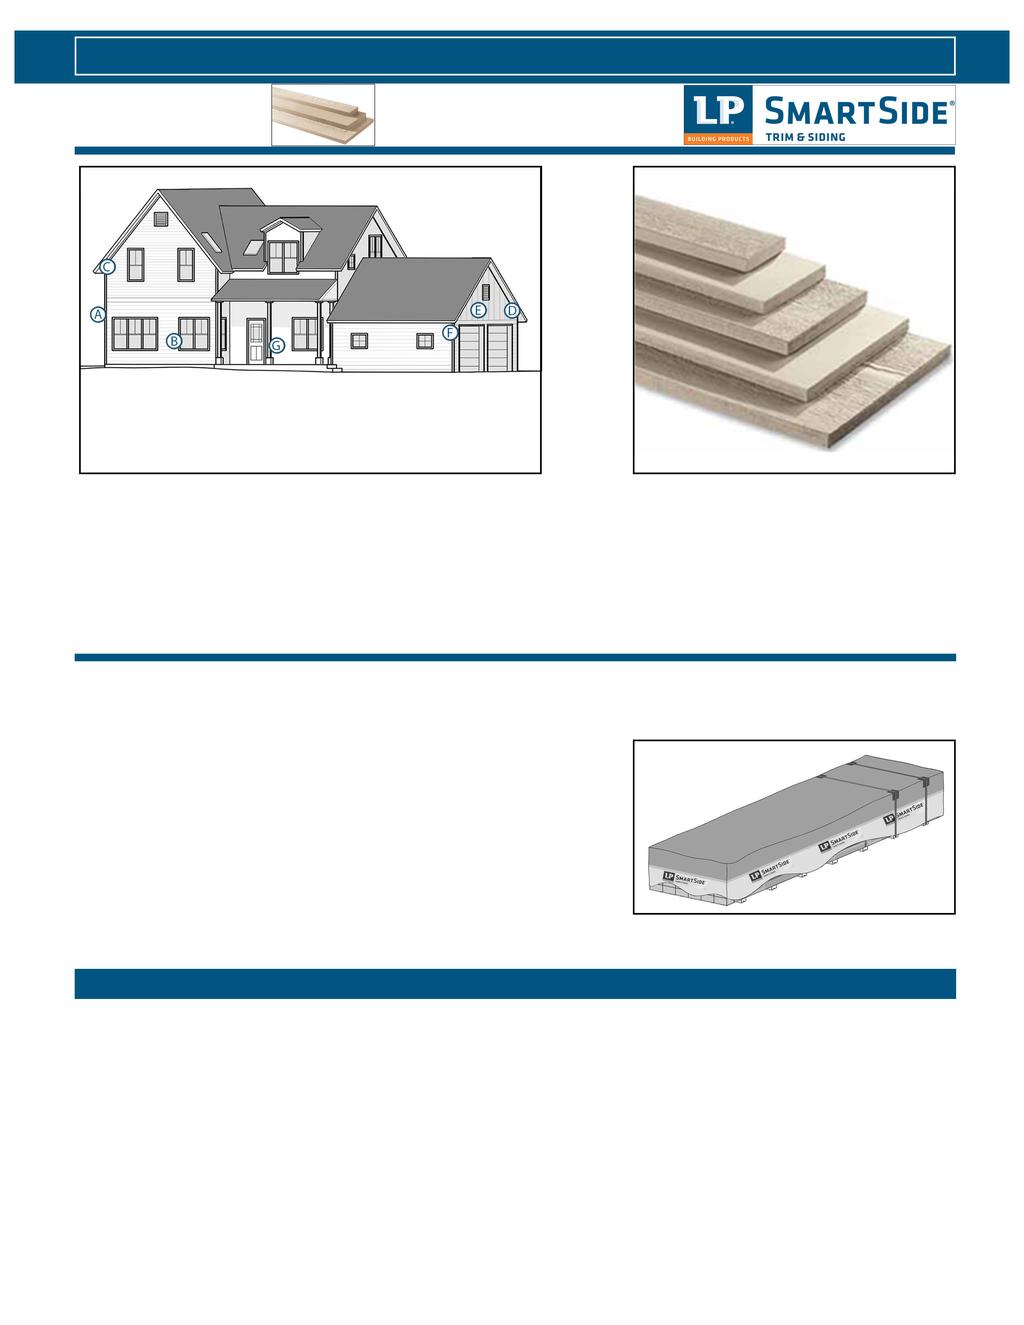 TRIM & FASCIA 190, 440, 540 & 2000 SERIES APPLICATION INSTRUCTIONS A - Corners B - Windows, Doors, Openings C - Gable Ends and Barge Rafters D - Fascia and Rake E - Board and Batten F - Mounting